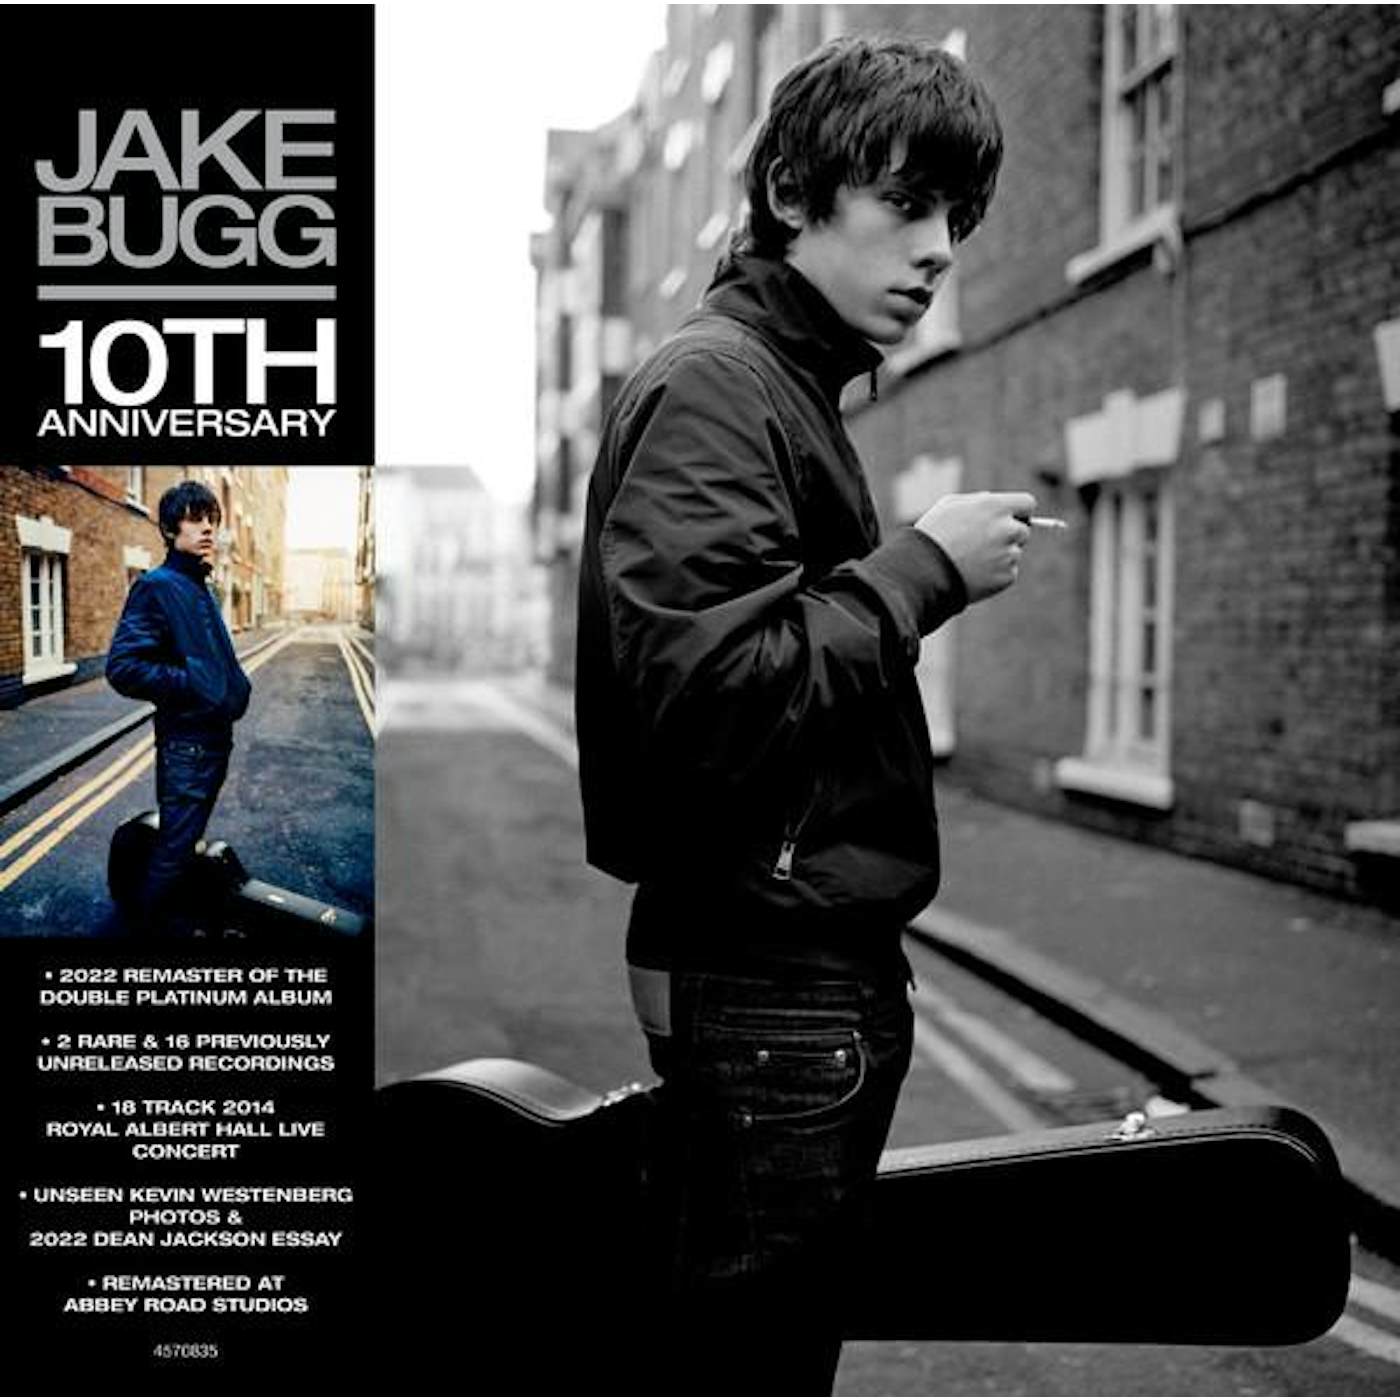 JAKE BUGG (10TH ANNIVERSARY DELUXE EDITION) (2LP) Vinyl Record